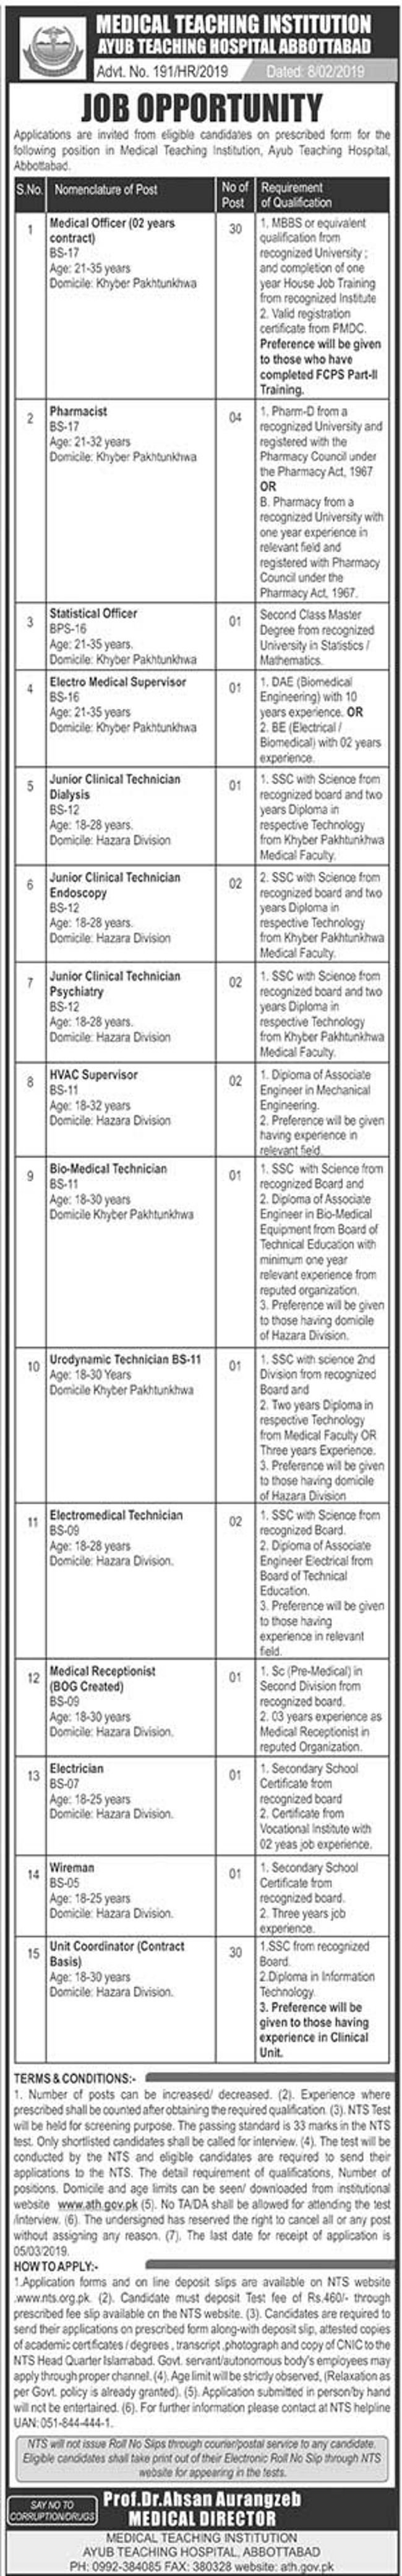 Ayub Teaching Hospital Abbottabad Jobs 2019 for 80+ Unit Coordinators, Pharmacists, Medical Officers, Technicians & Other Posts (Download NTS Form)